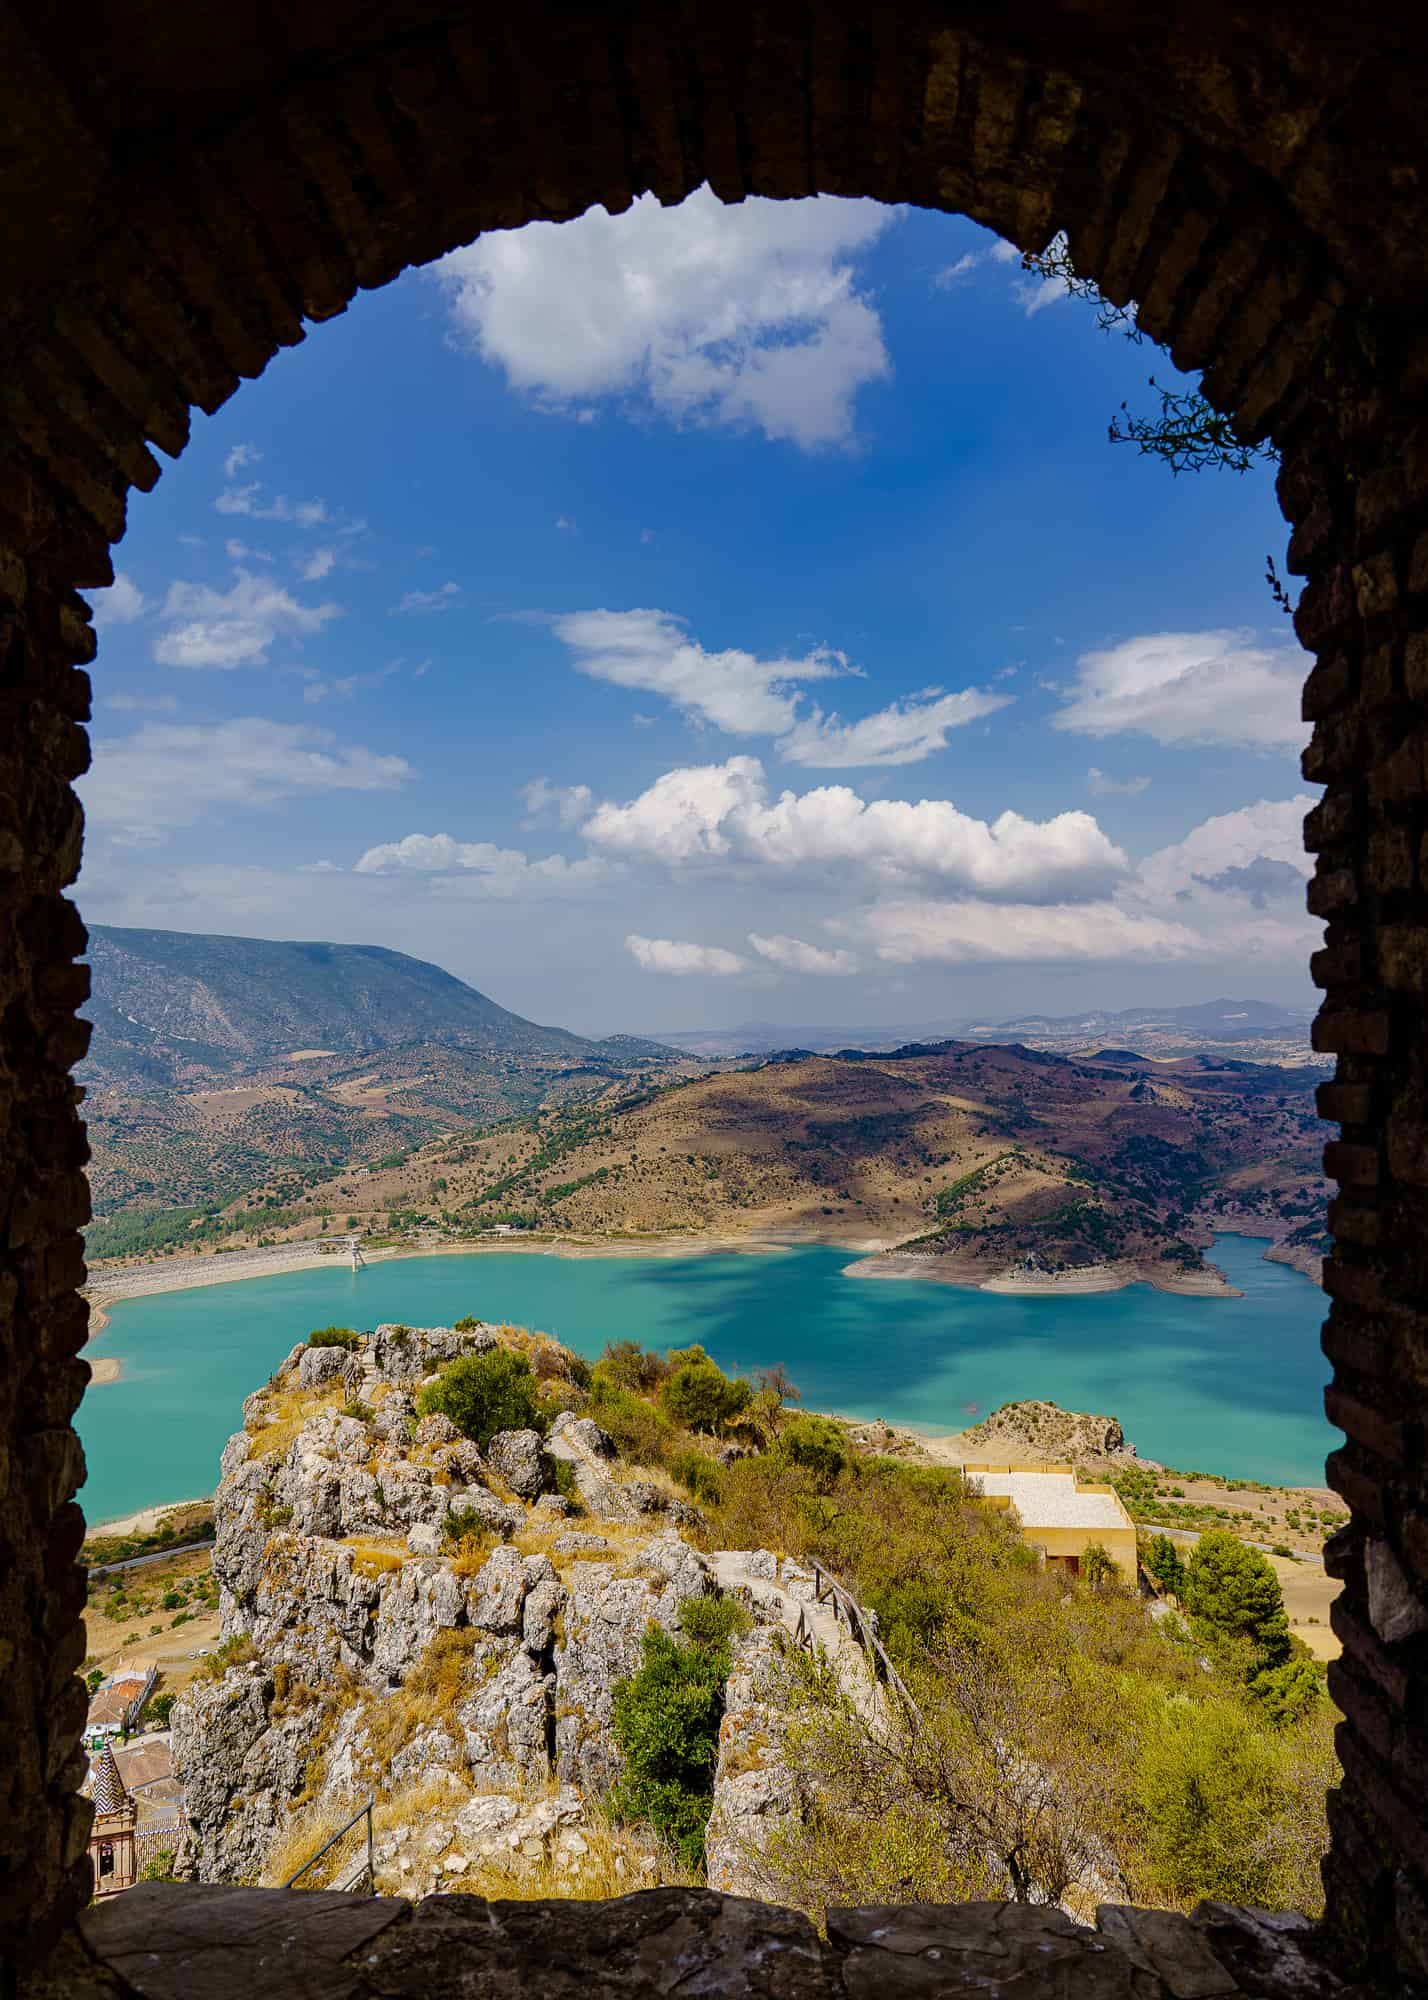 window framed view of turquoise lake, fields, road and mountains in the background